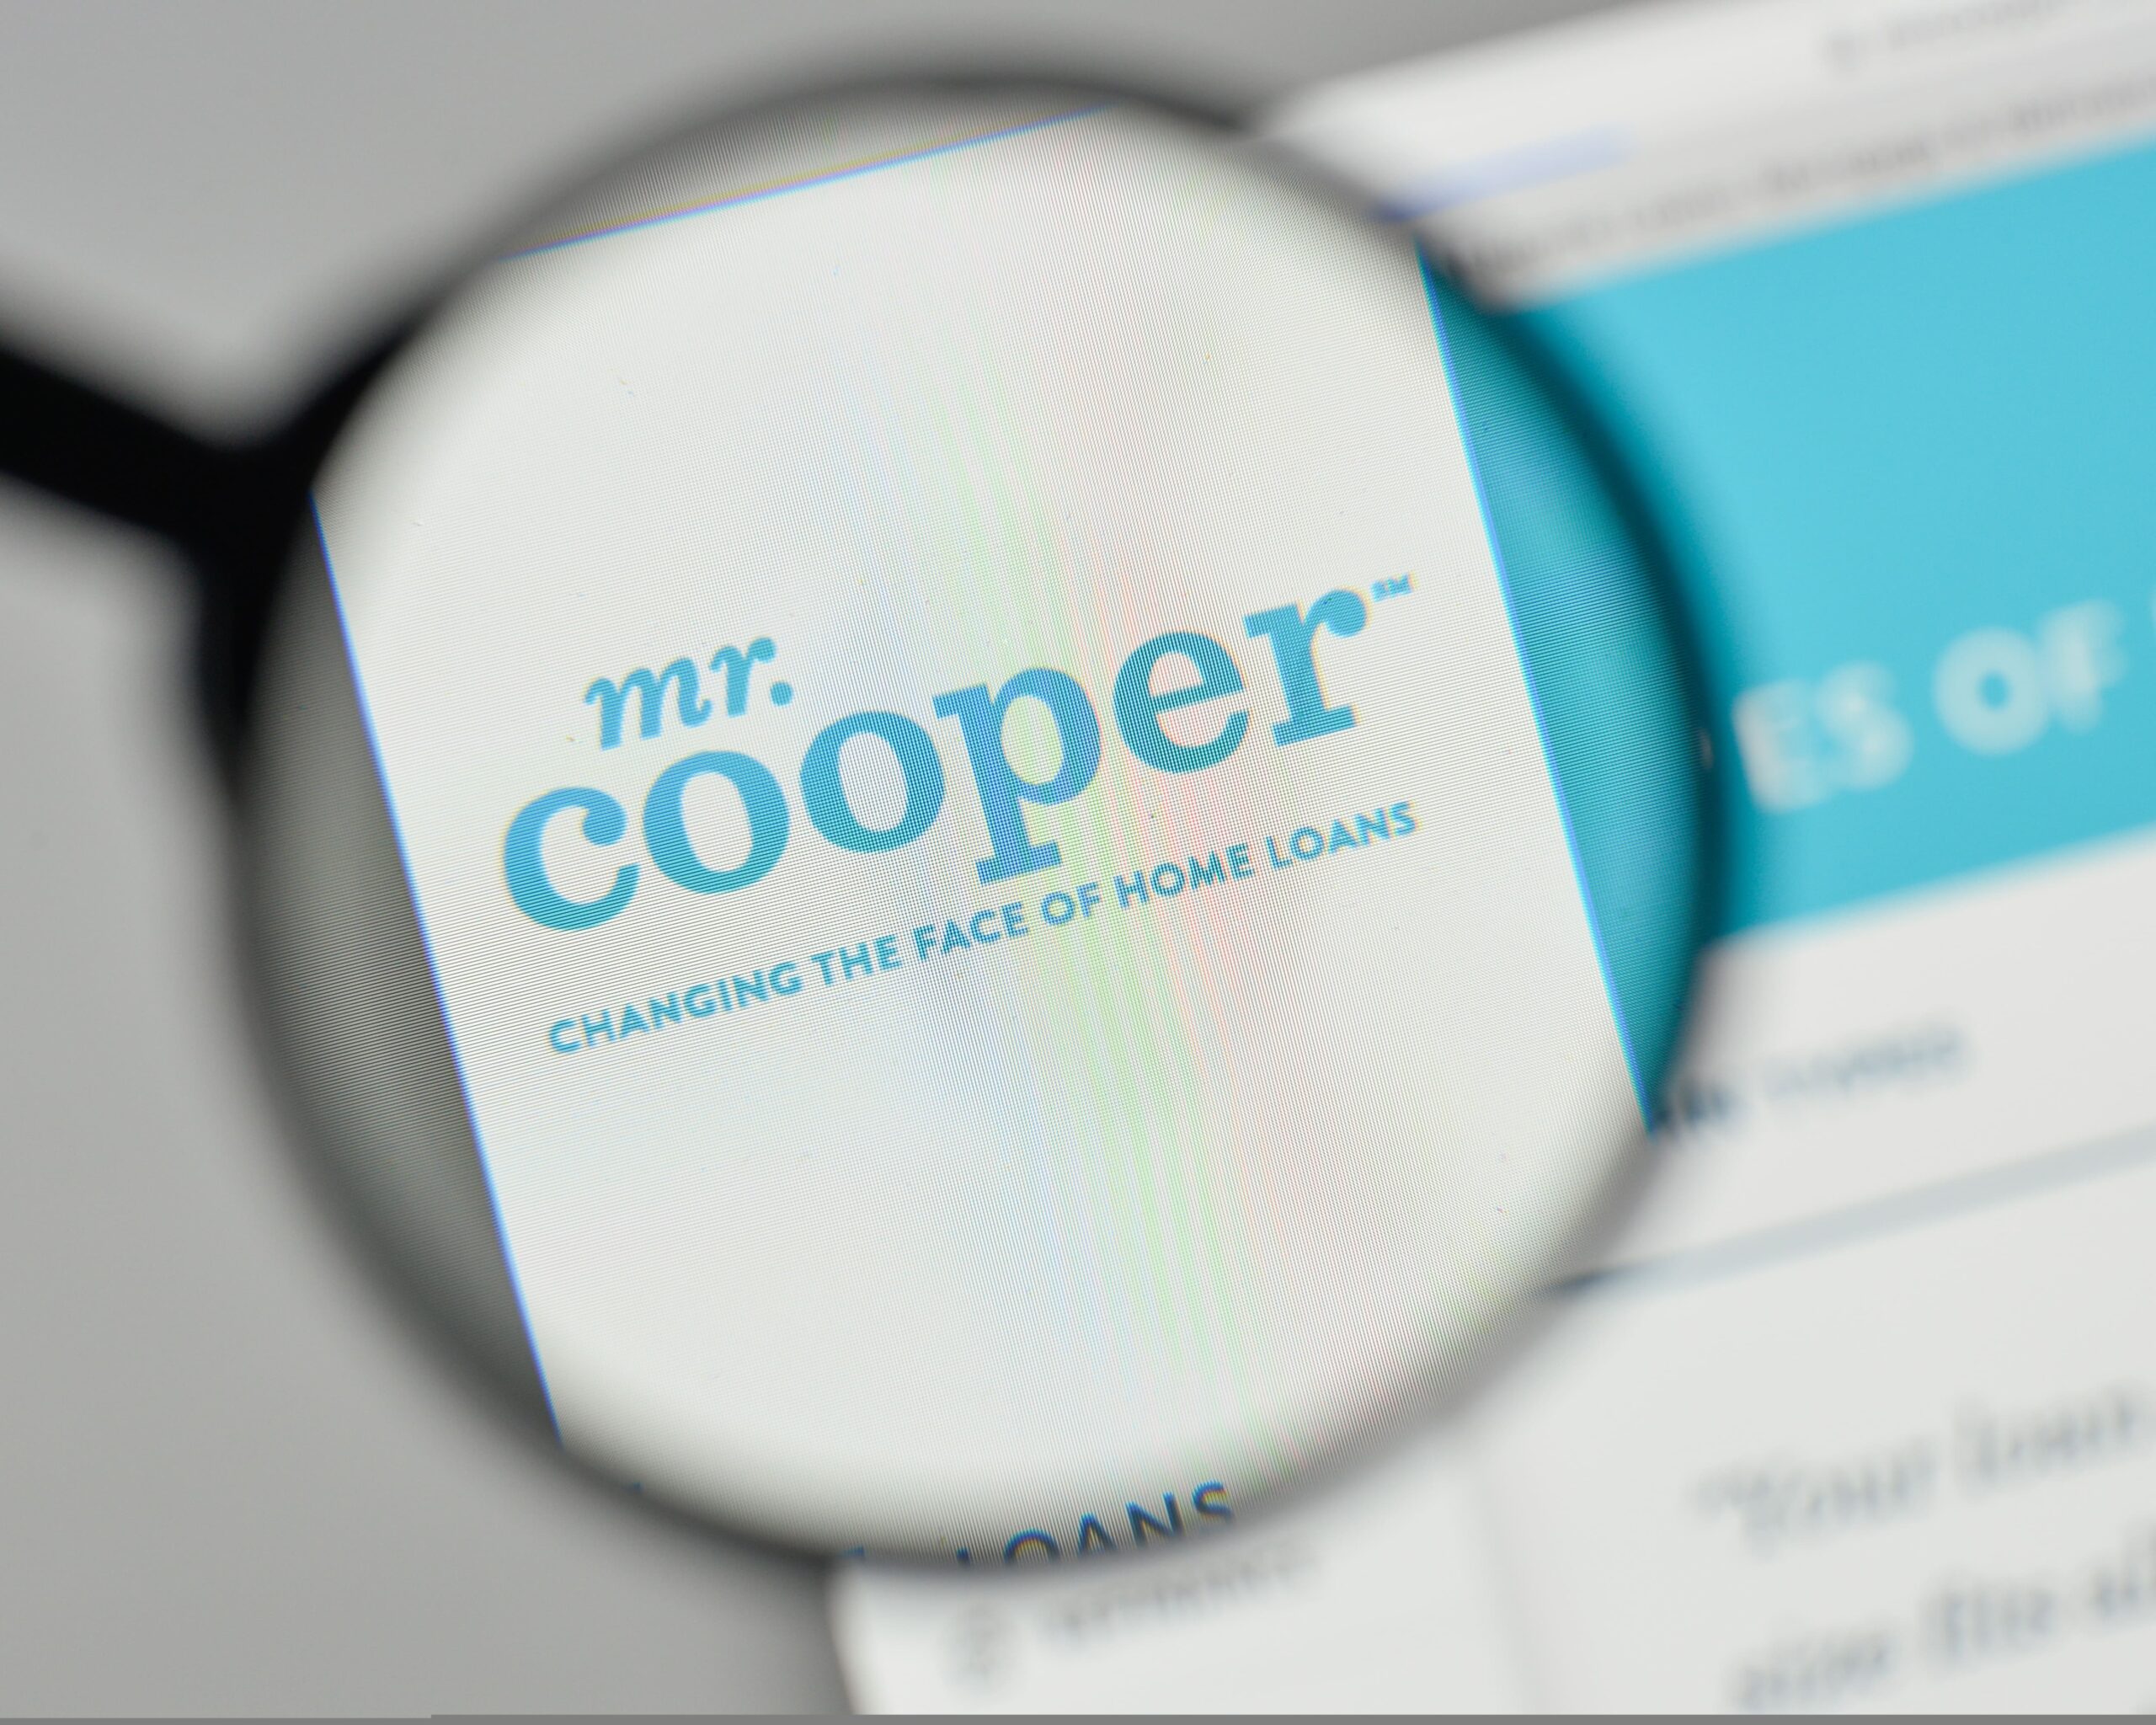 Stay Safe Online With Mr. Cooper’s Cybersecurity Tips For Everyday Users